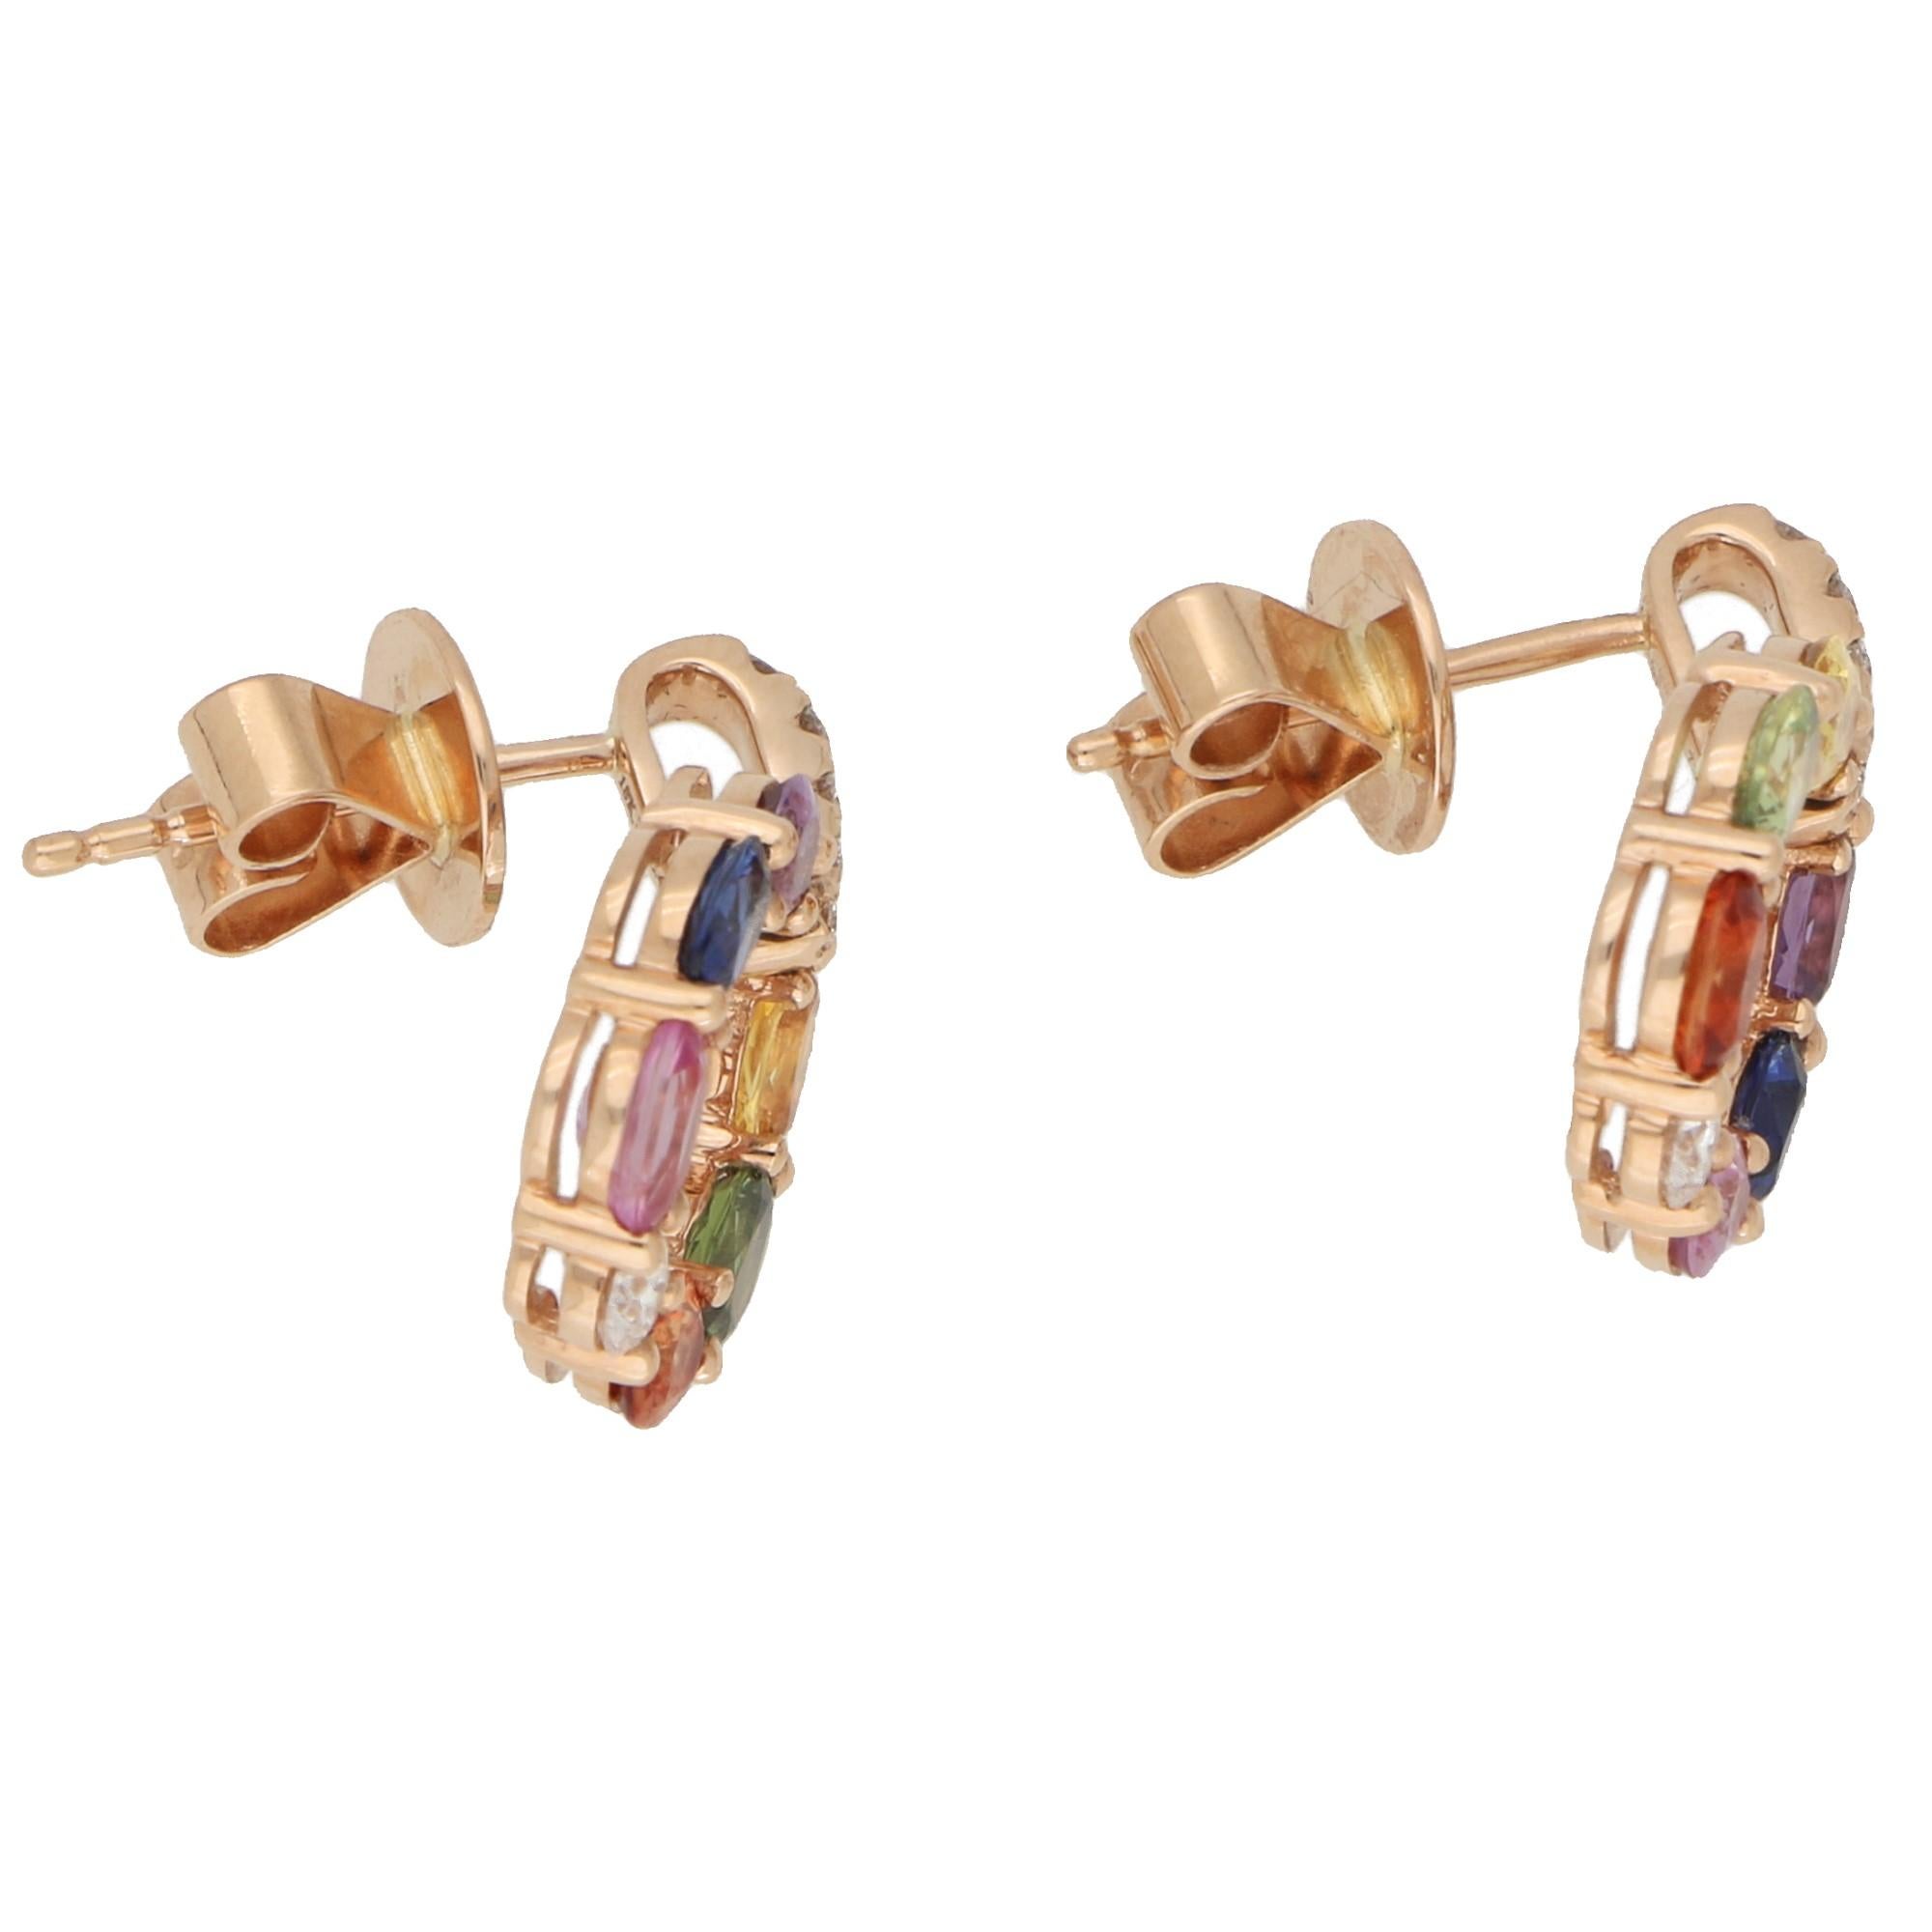 A beautiful pair of rainbow sapphire hoop earrings set in 18k rose gold.

The earrings are predominantly set with six oval cut rainbow sapphires set in a perfect hoop shape. This hoop is secured on a pave set diamond drop and is articulated so that